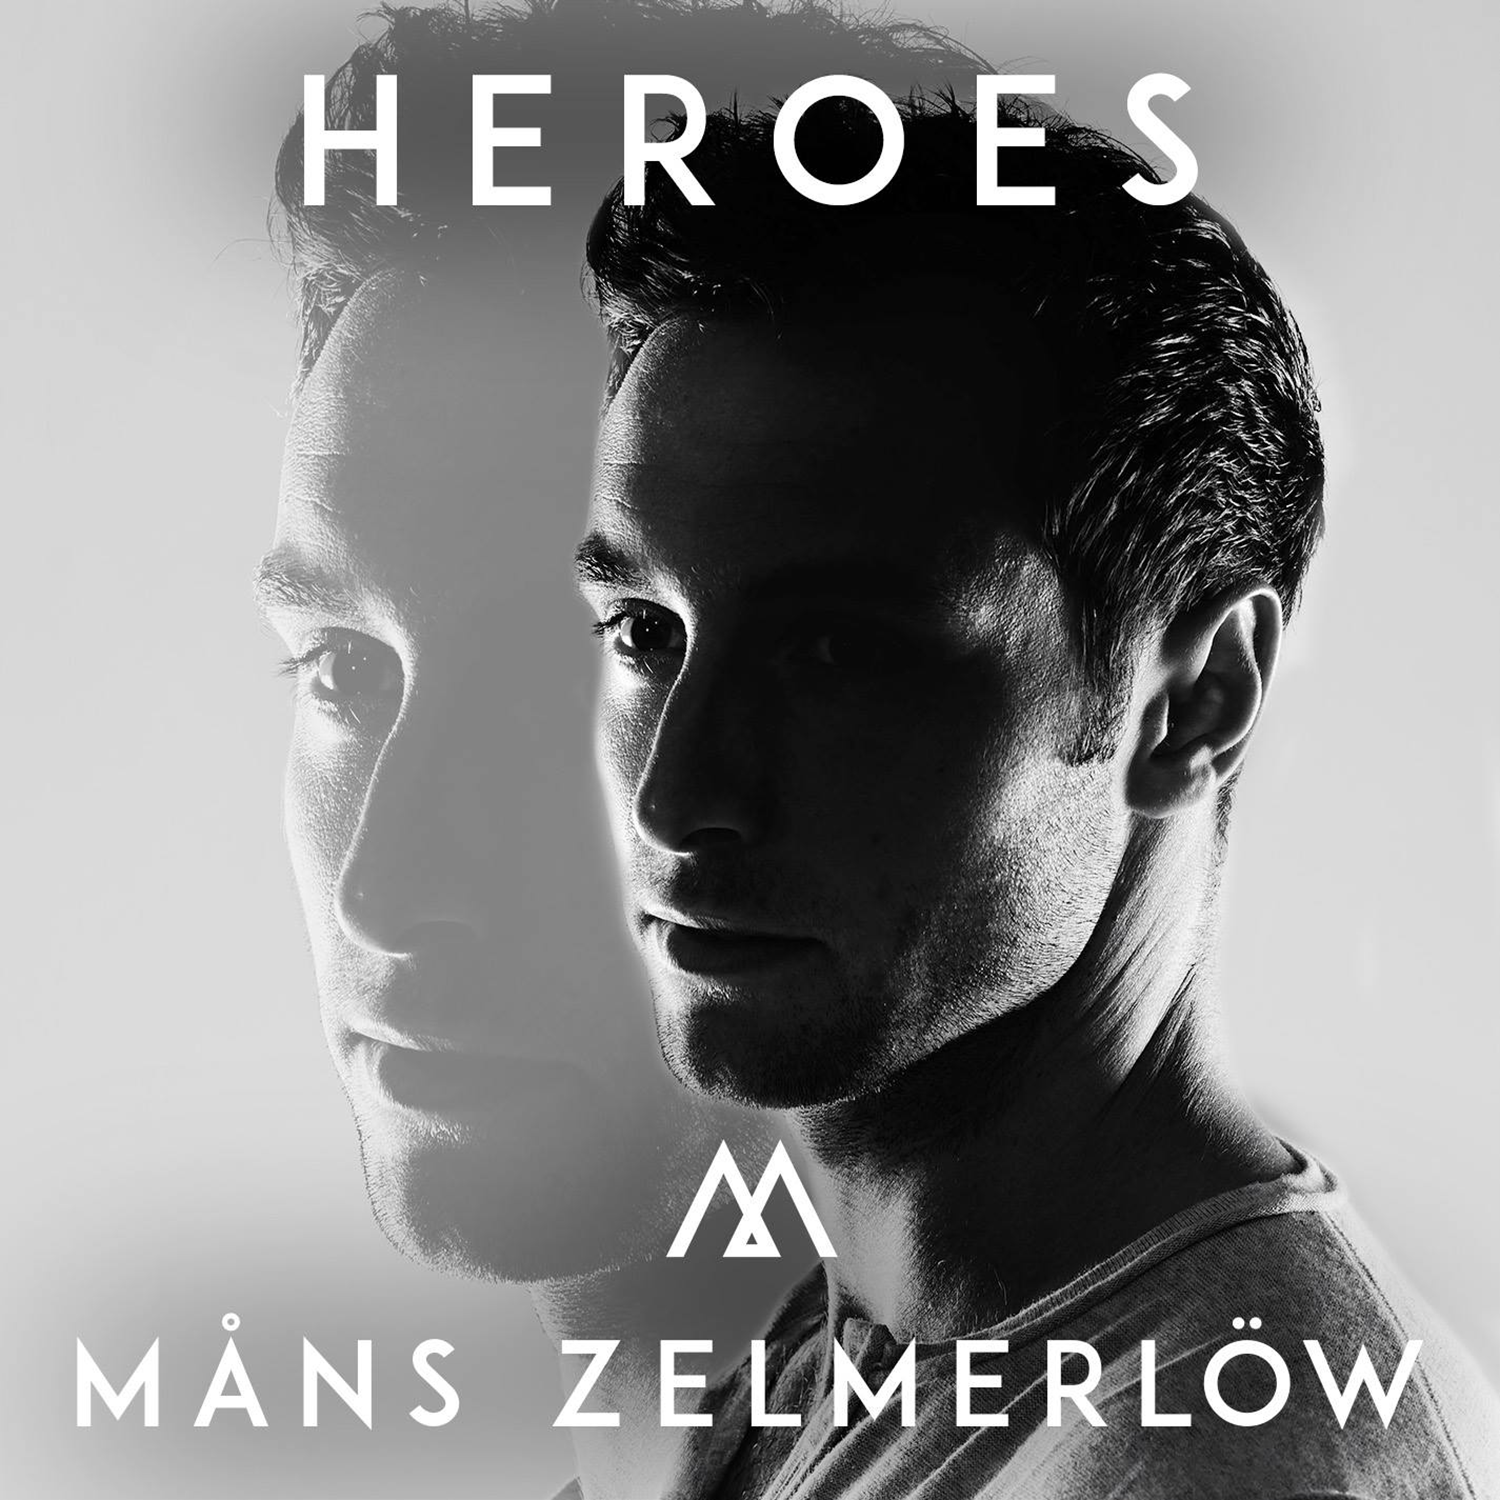 The Dark Story Behind Eurovision’s Måns Zelmerlöw’s Song Heroes